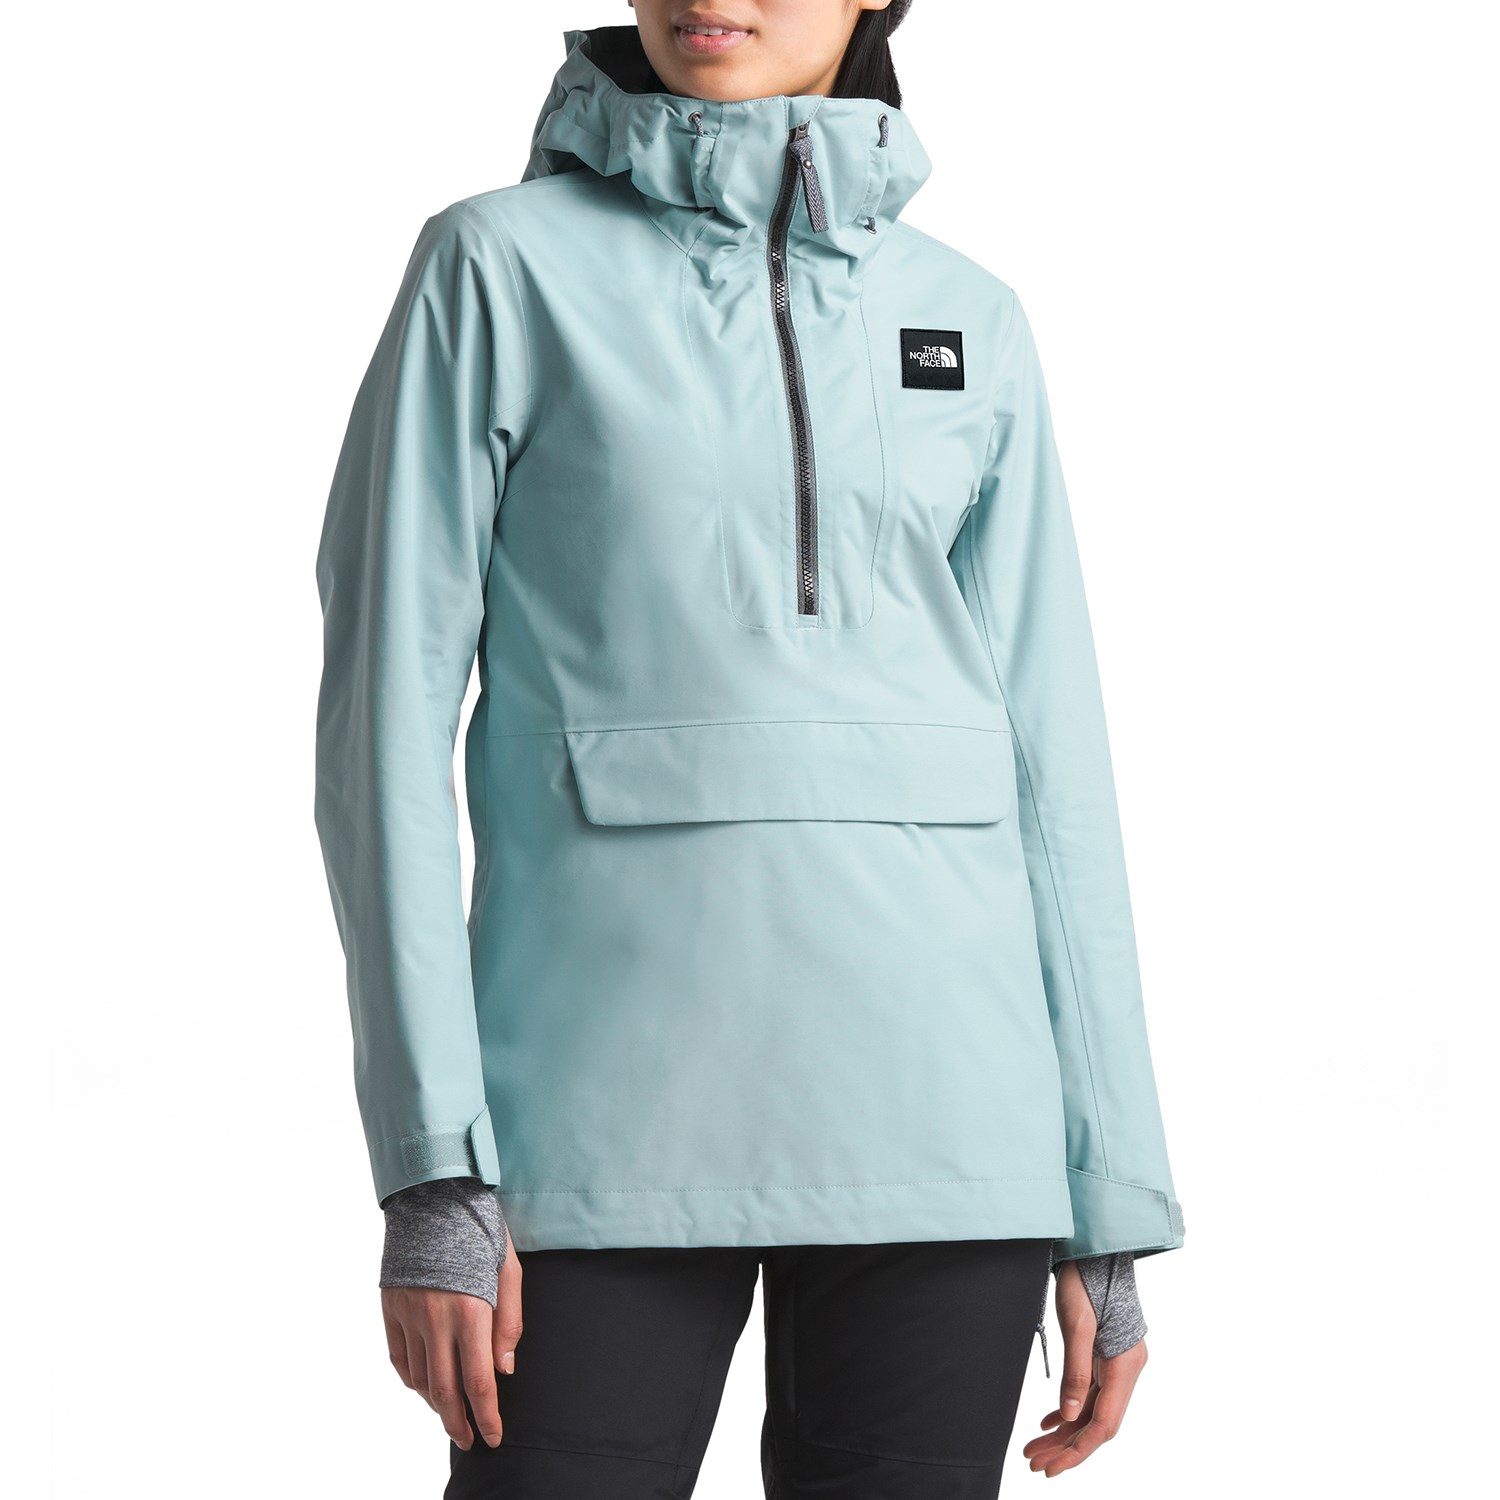 north face pullover jacket women's